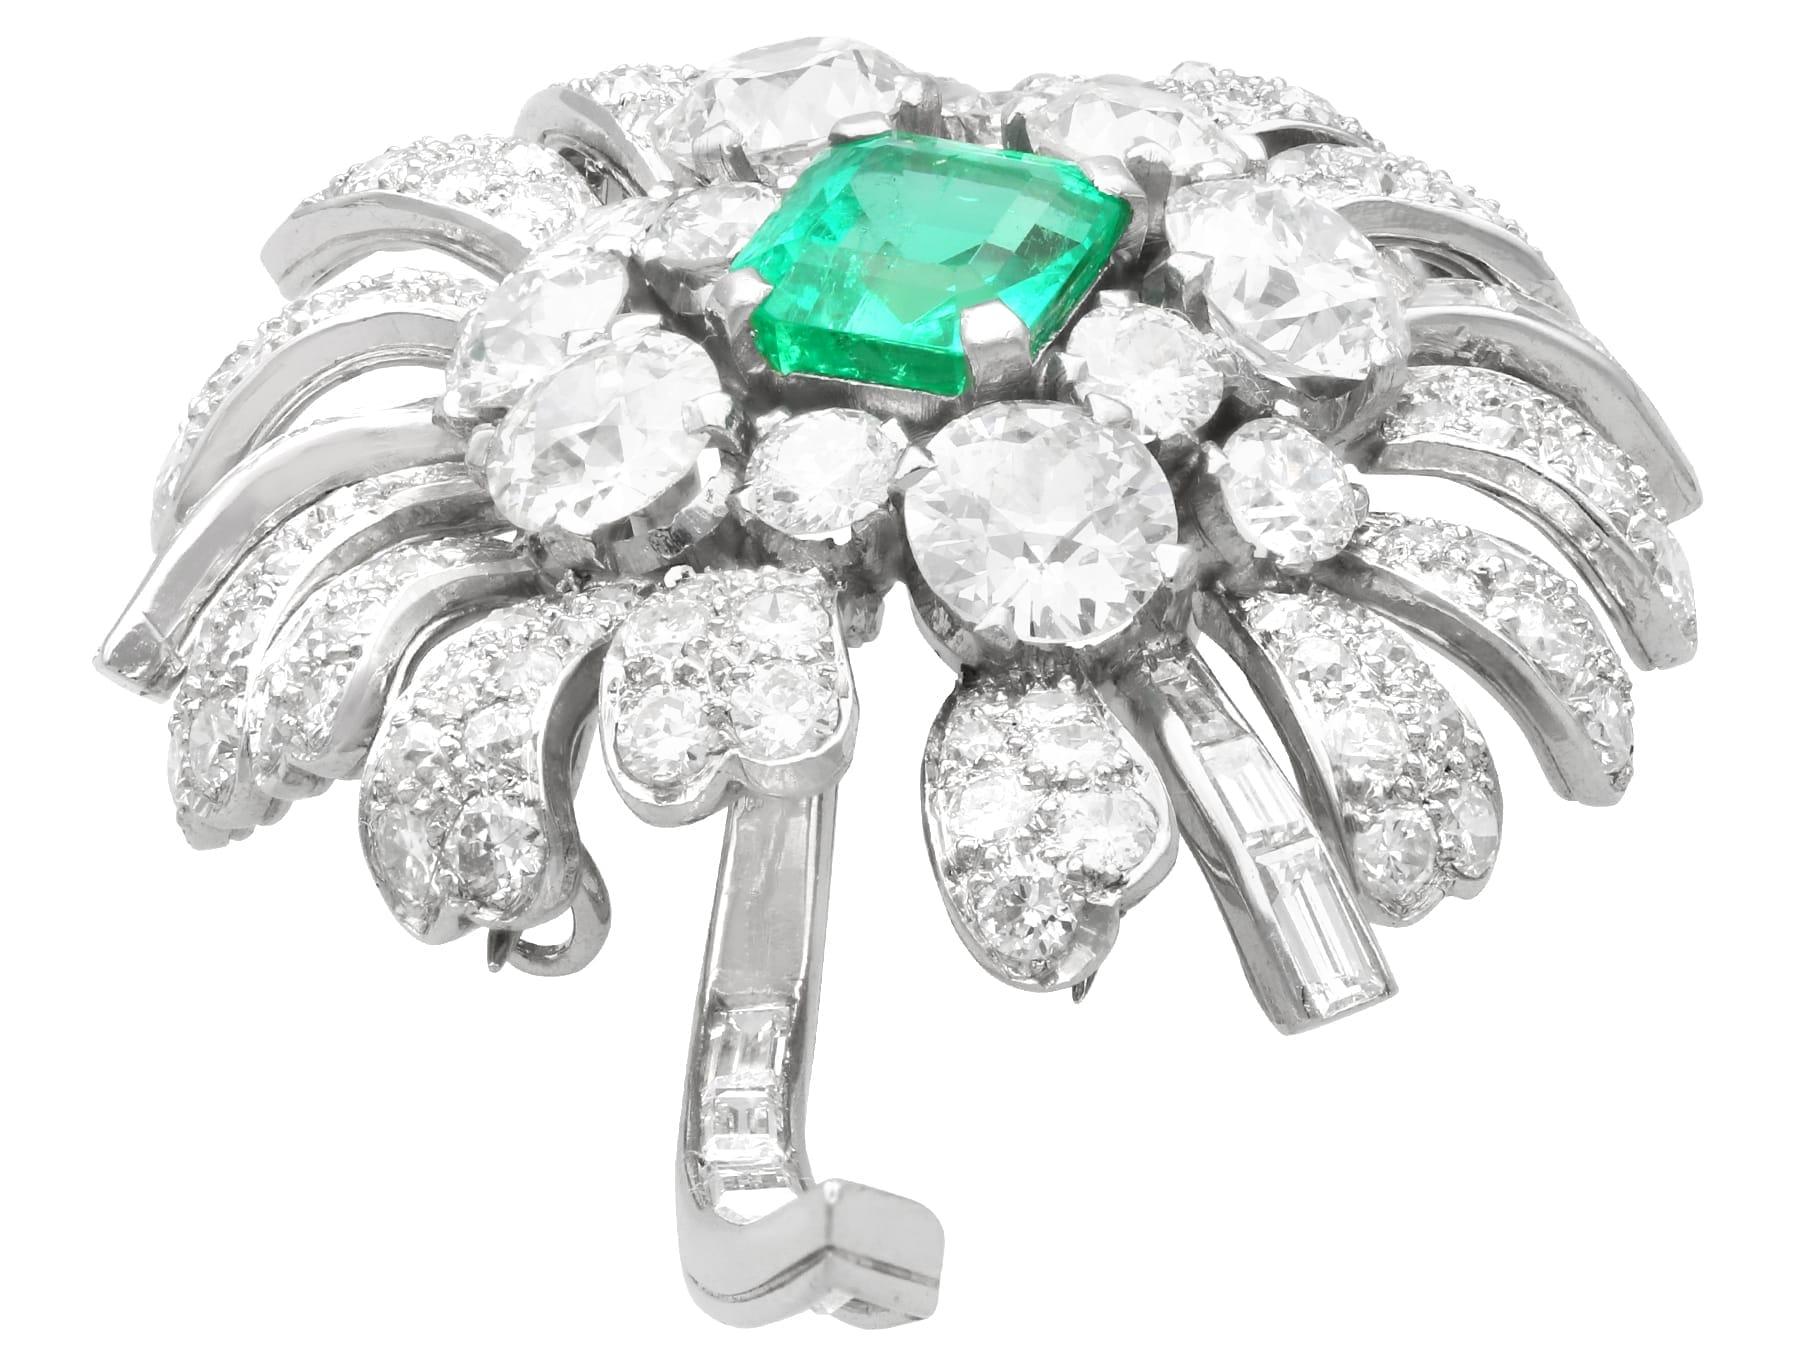 Antique 2.10Ct Emerald and 7.73Ct Diamond Platinum Floral Brooch Circa 1900 In Excellent Condition For Sale In Jesmond, Newcastle Upon Tyne